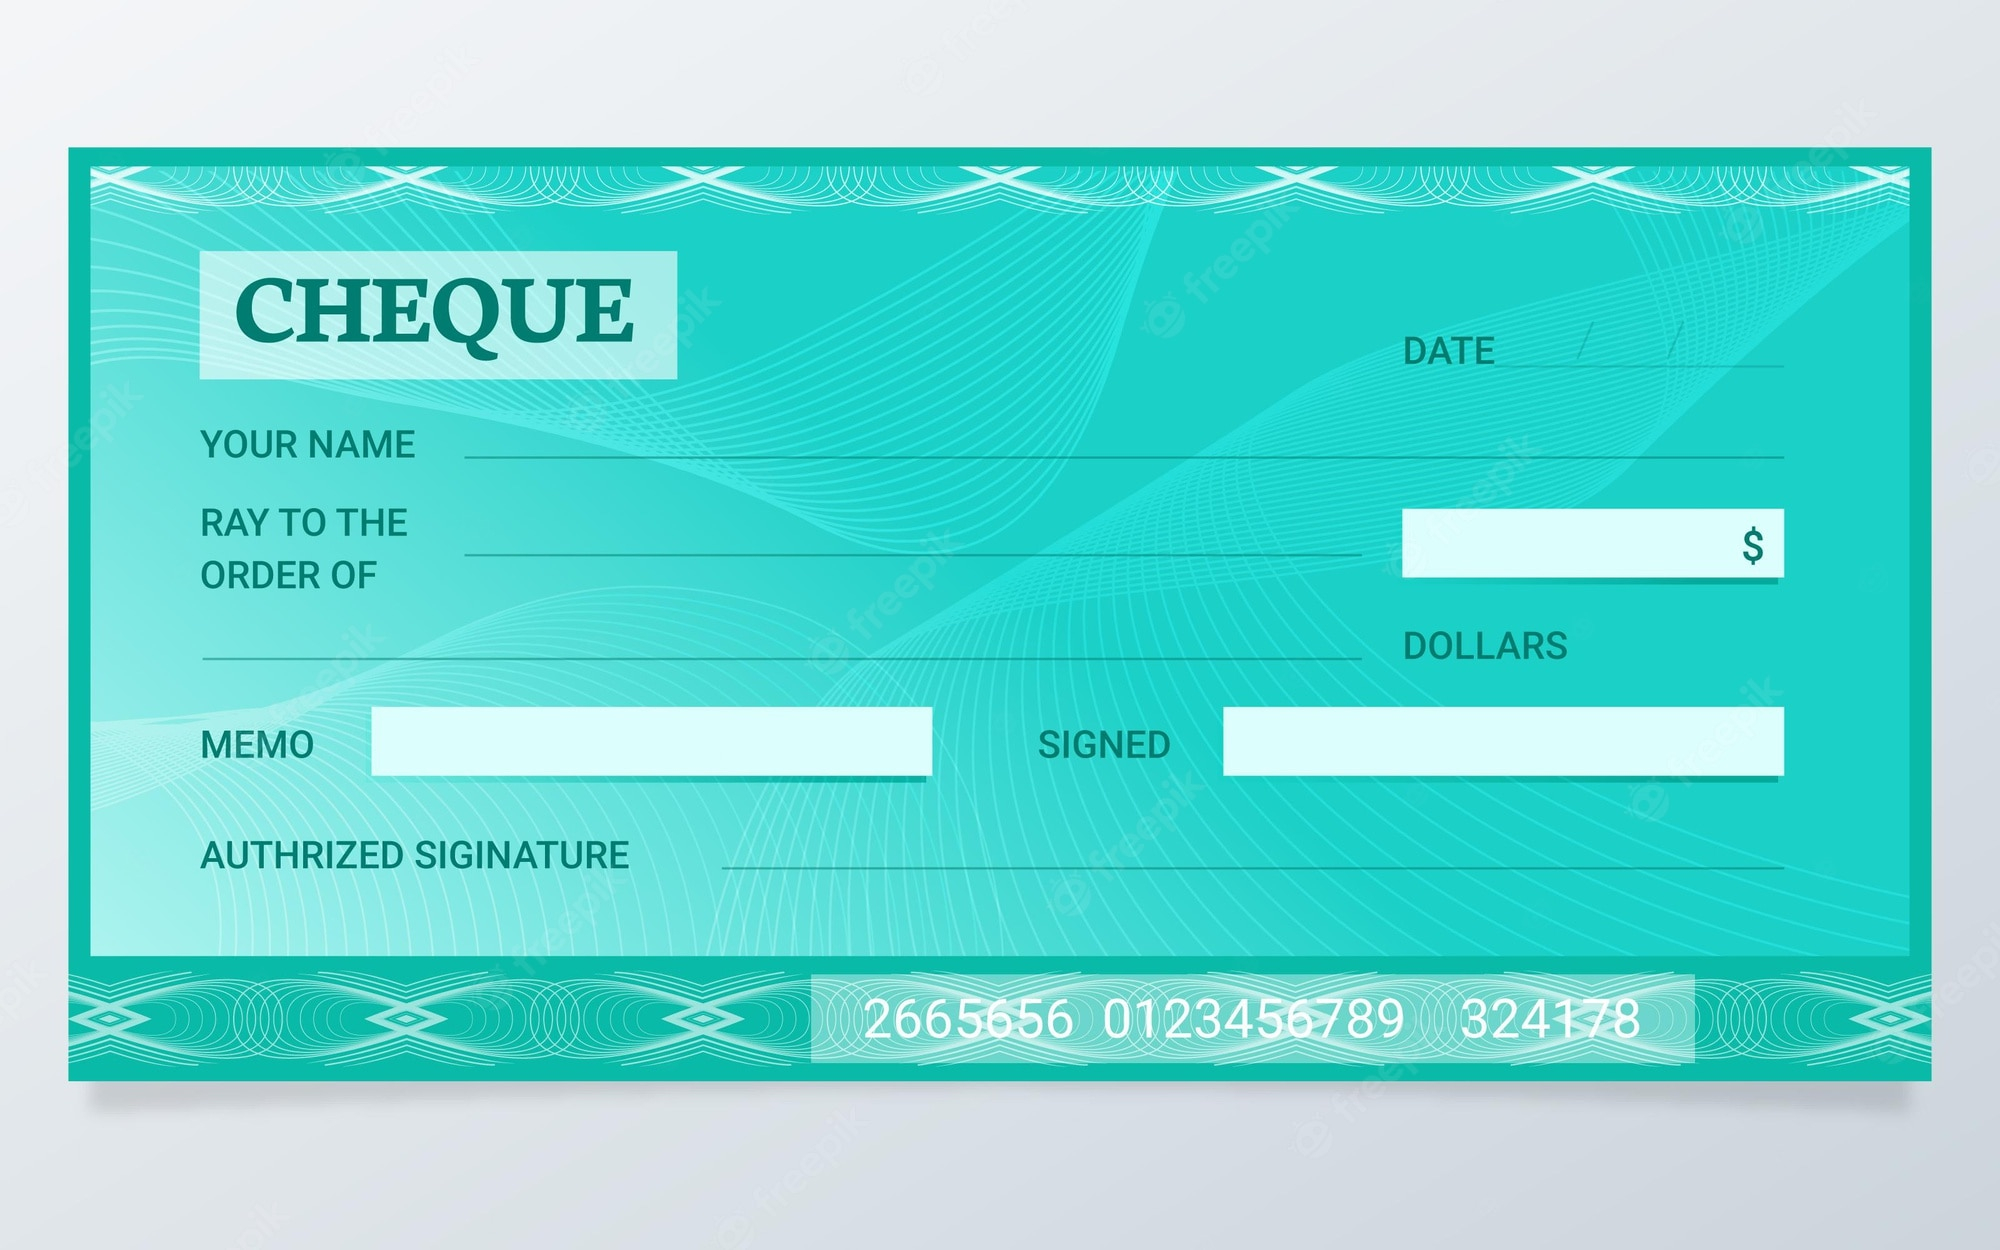 Blank check template Vectors & Illustrations for Free Download  Pertaining To Fun Blank Cheque Template